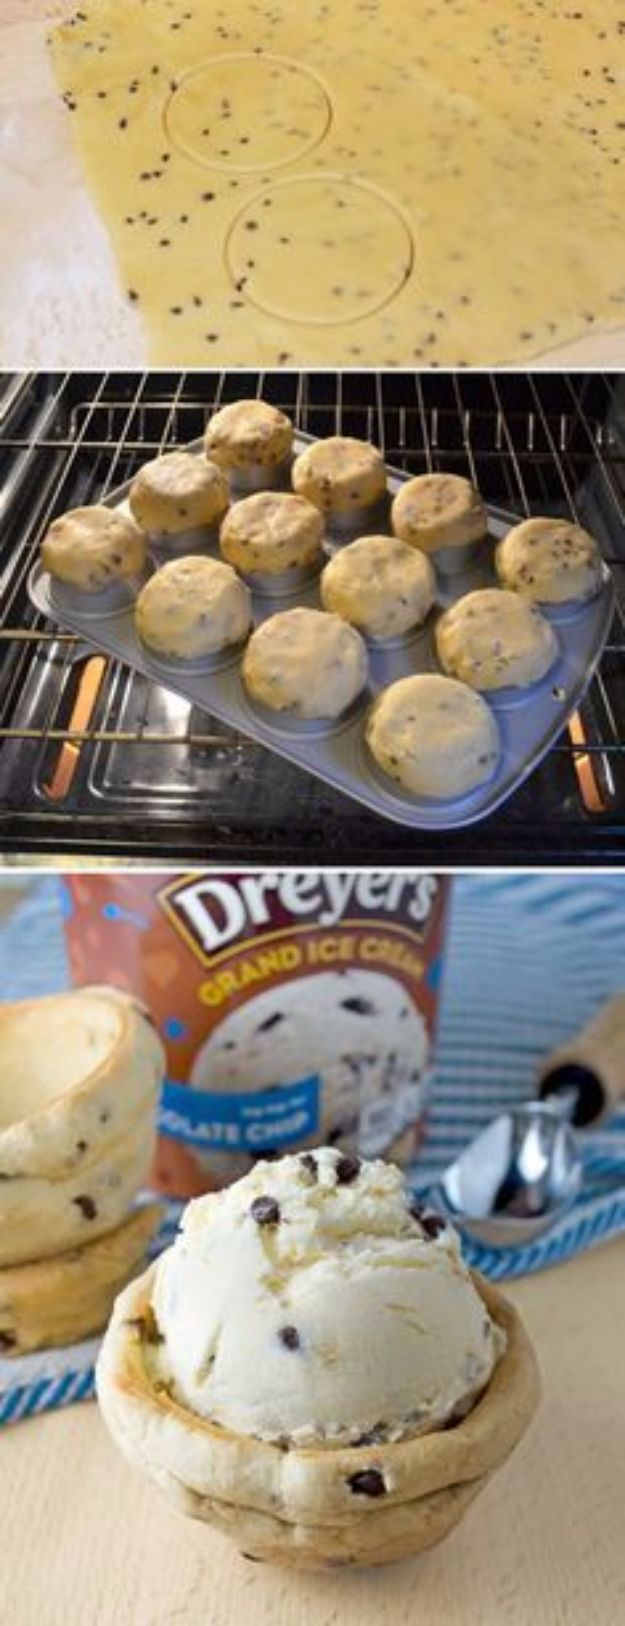 Easy Desserts for Teens to Make at Home - Chocolate Chip Cookie Bowls - Cool Dessert Recipes That Are Simple and Quick Enough For Teens, Teenagers and Older Kids - Best Dorm Snacks and Ideas - Microwave, No Bake, 3 Ingredient, Chocolate, Mug Cakes and More #desserts #teenrecipes #recipes #dessertrecipes #easyrecipes